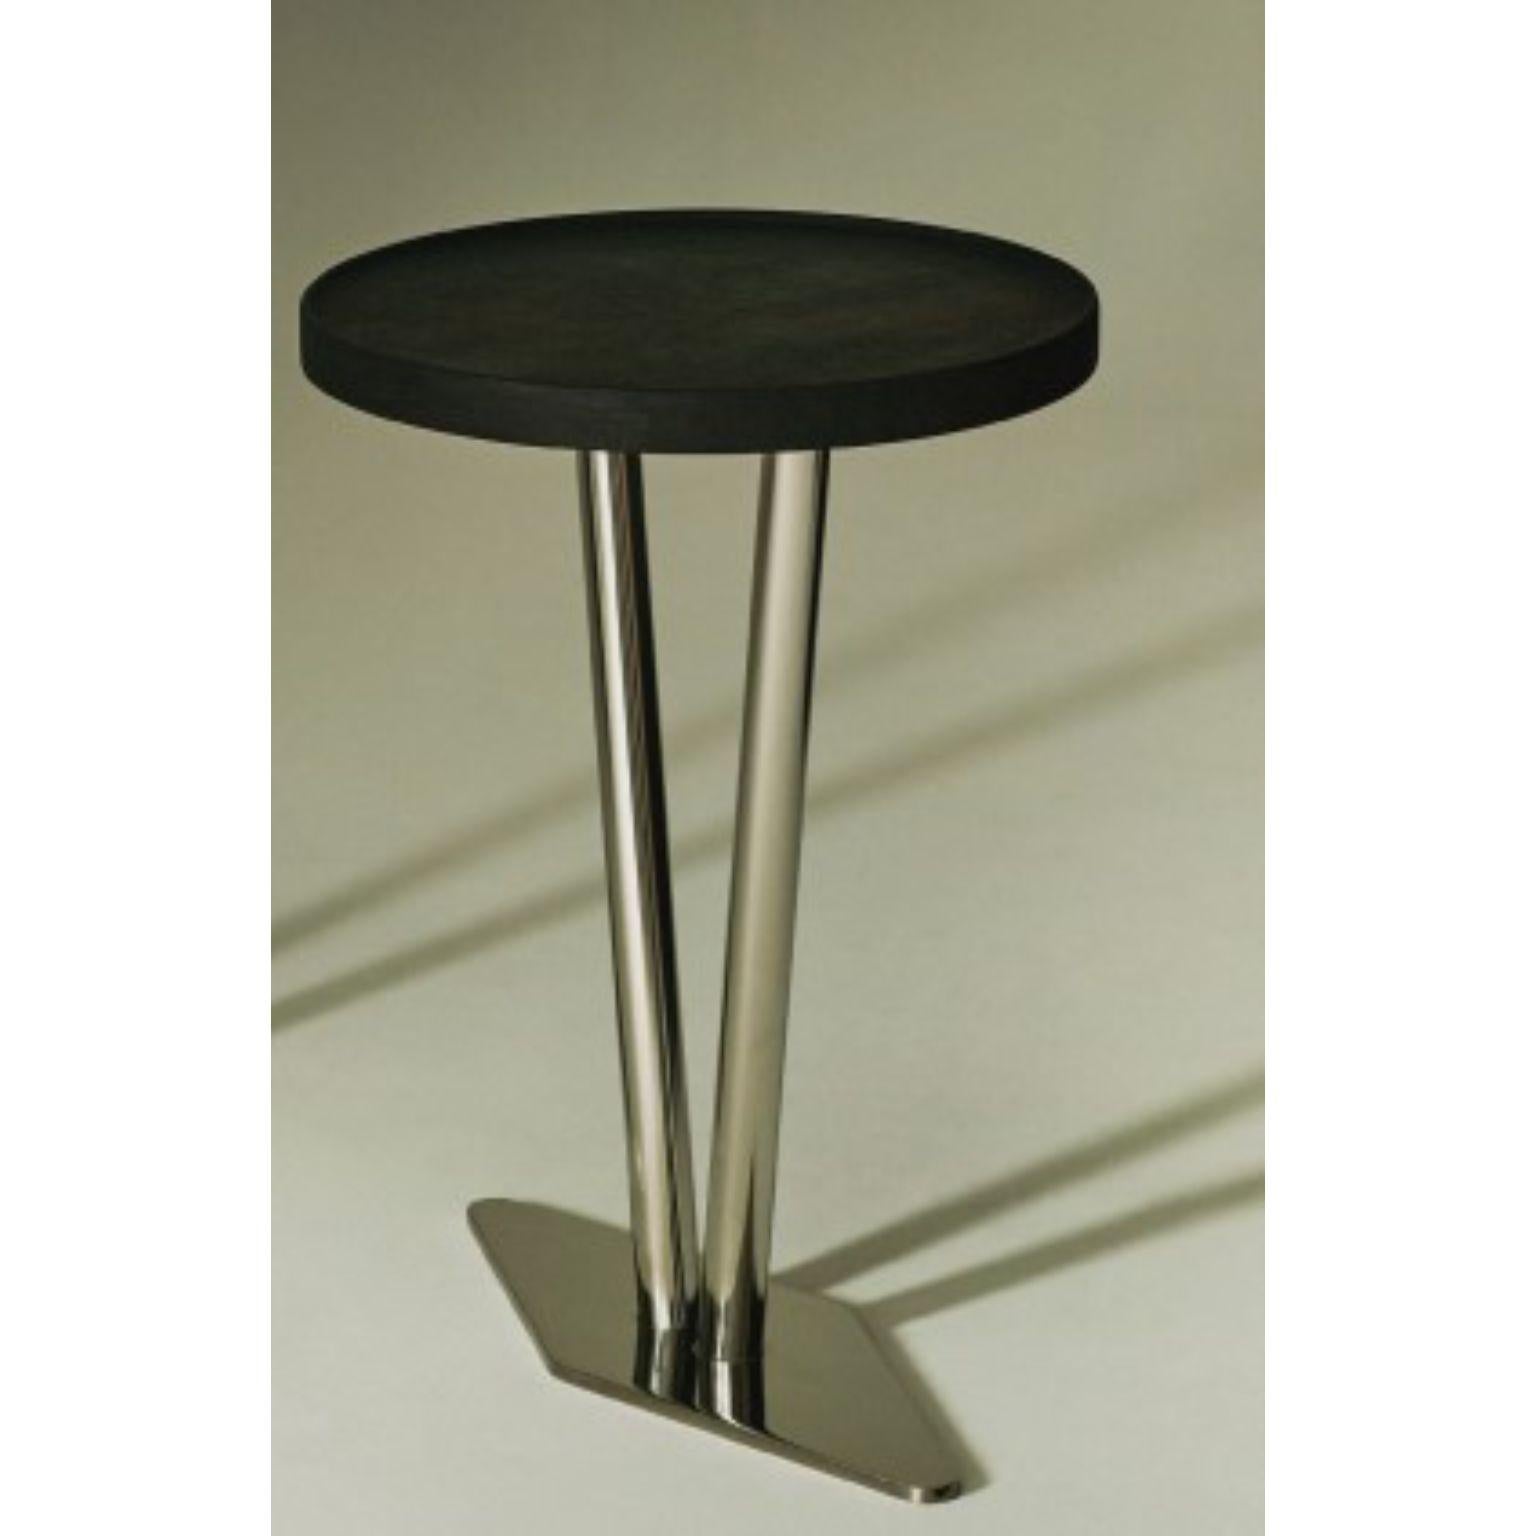 No.0322 side table by Olivia Bossy
Limited Edition of 6 
Dimensions: D 53 x W 45 x H 63 cm
Materials: Ebonised oak, stainless steel.

A collection born of fire, Euclidean geometry and the display mechanism of museum artefacts.

From a